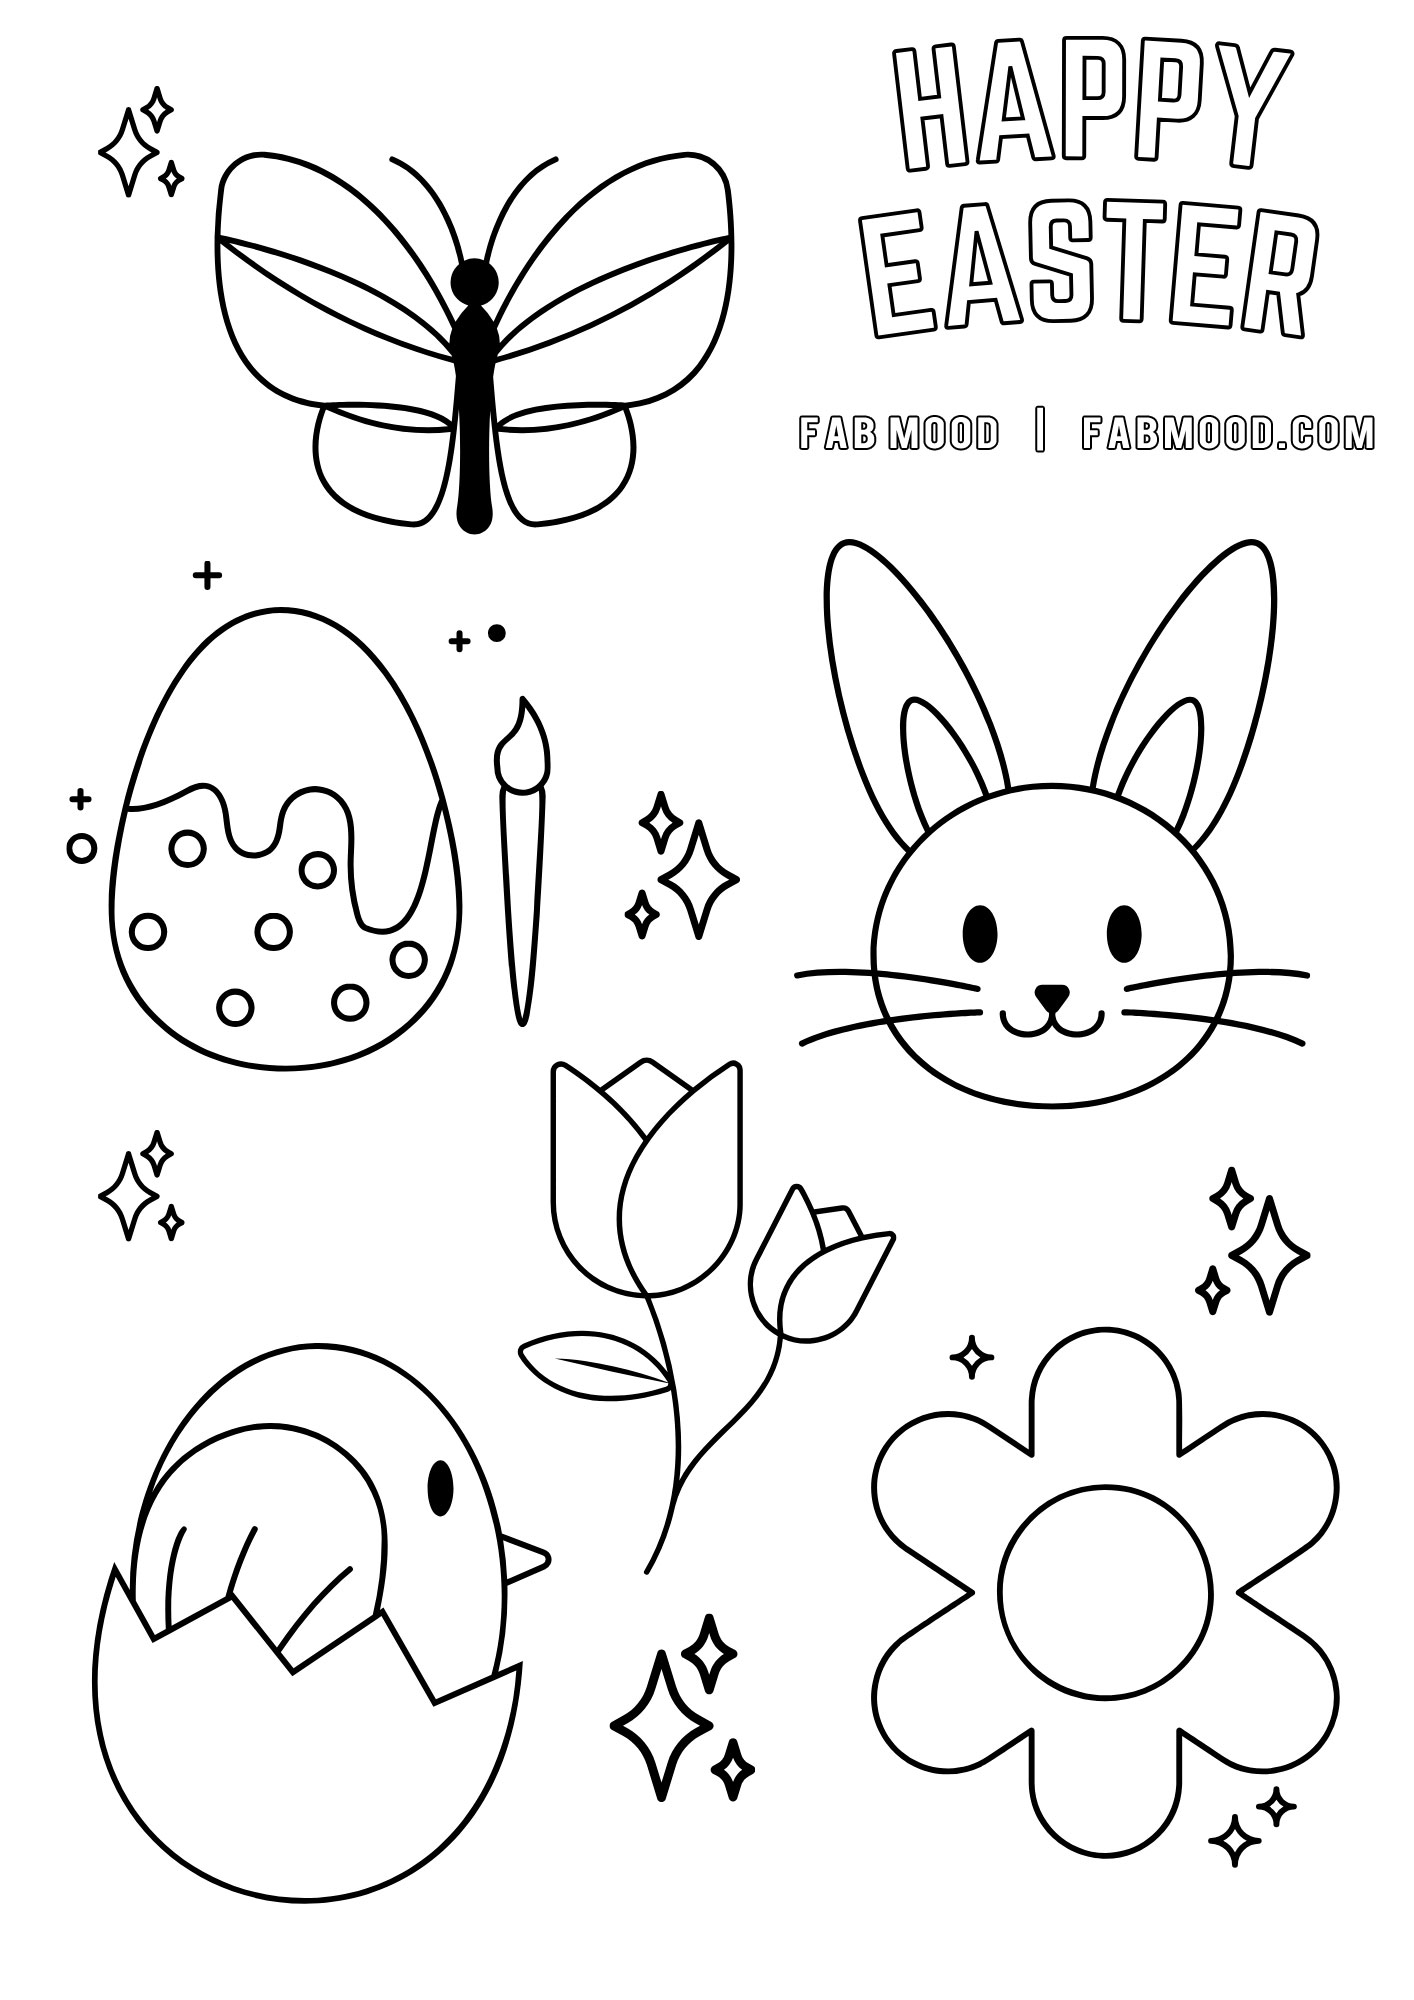 FREE 10 Easter Colouring Pictures : Free Printable